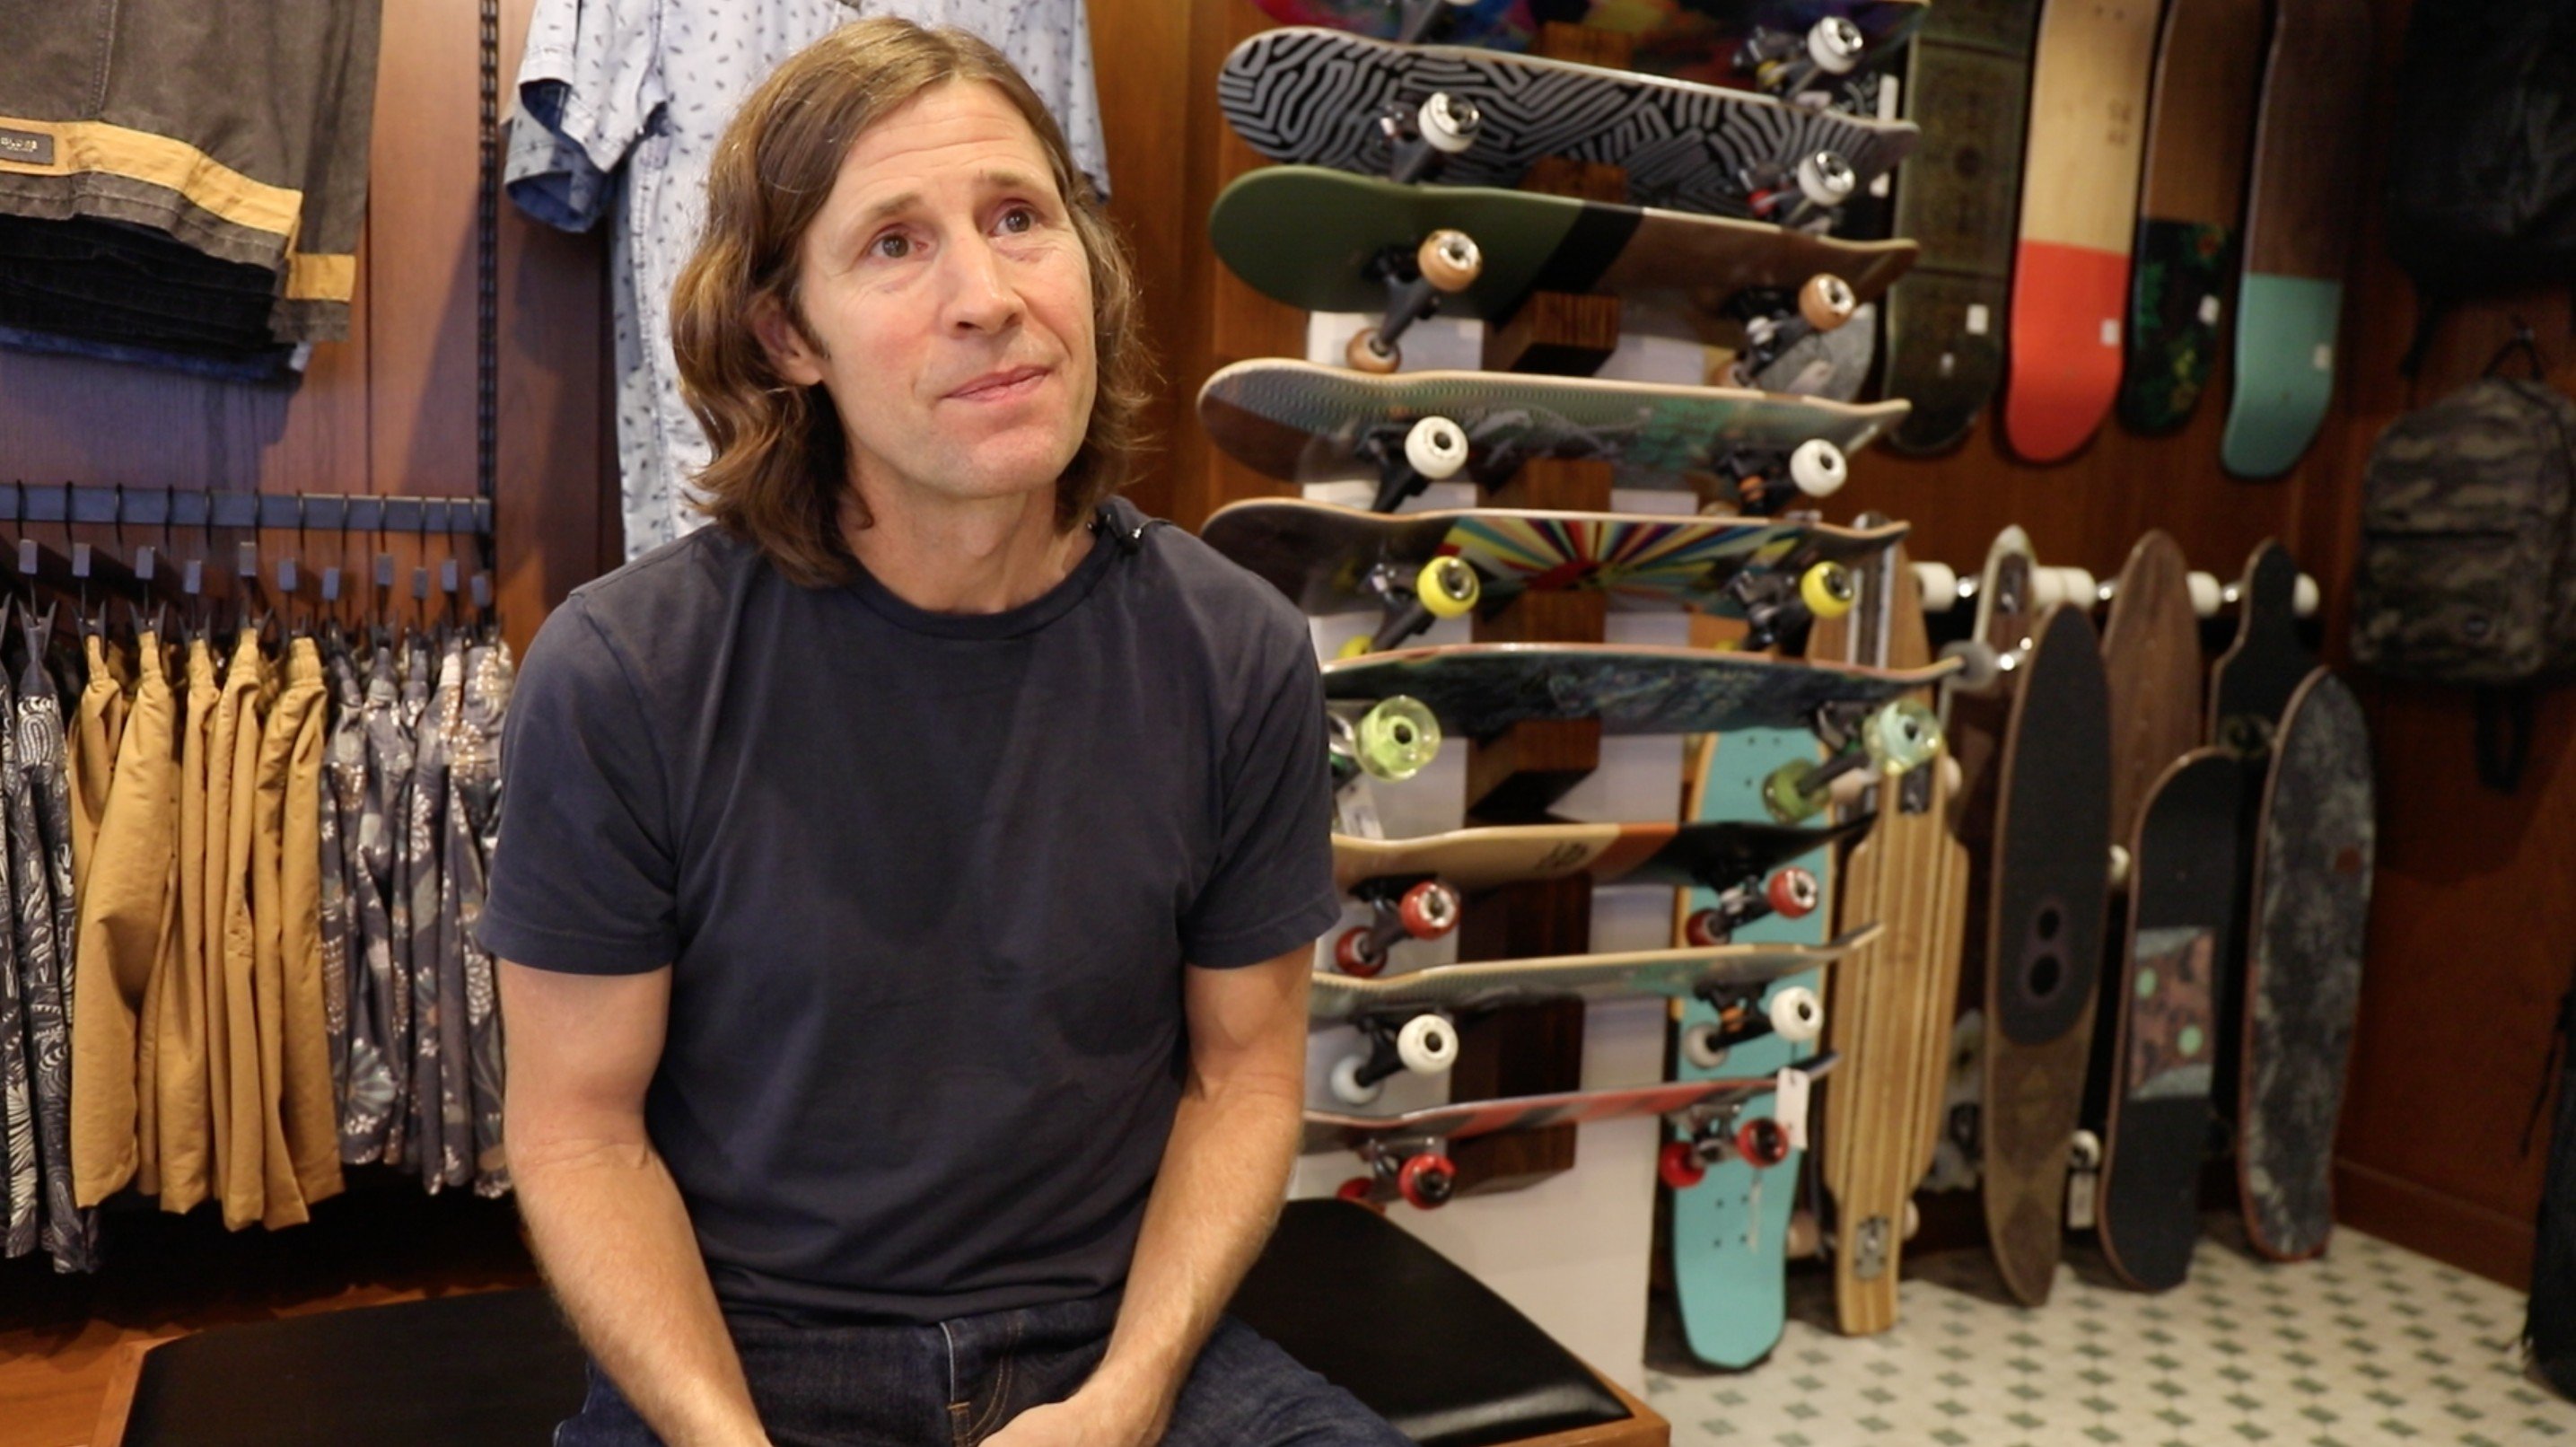 Skateboarding legend Rodney Mullen says it's all about attitude | South  China Morning Post